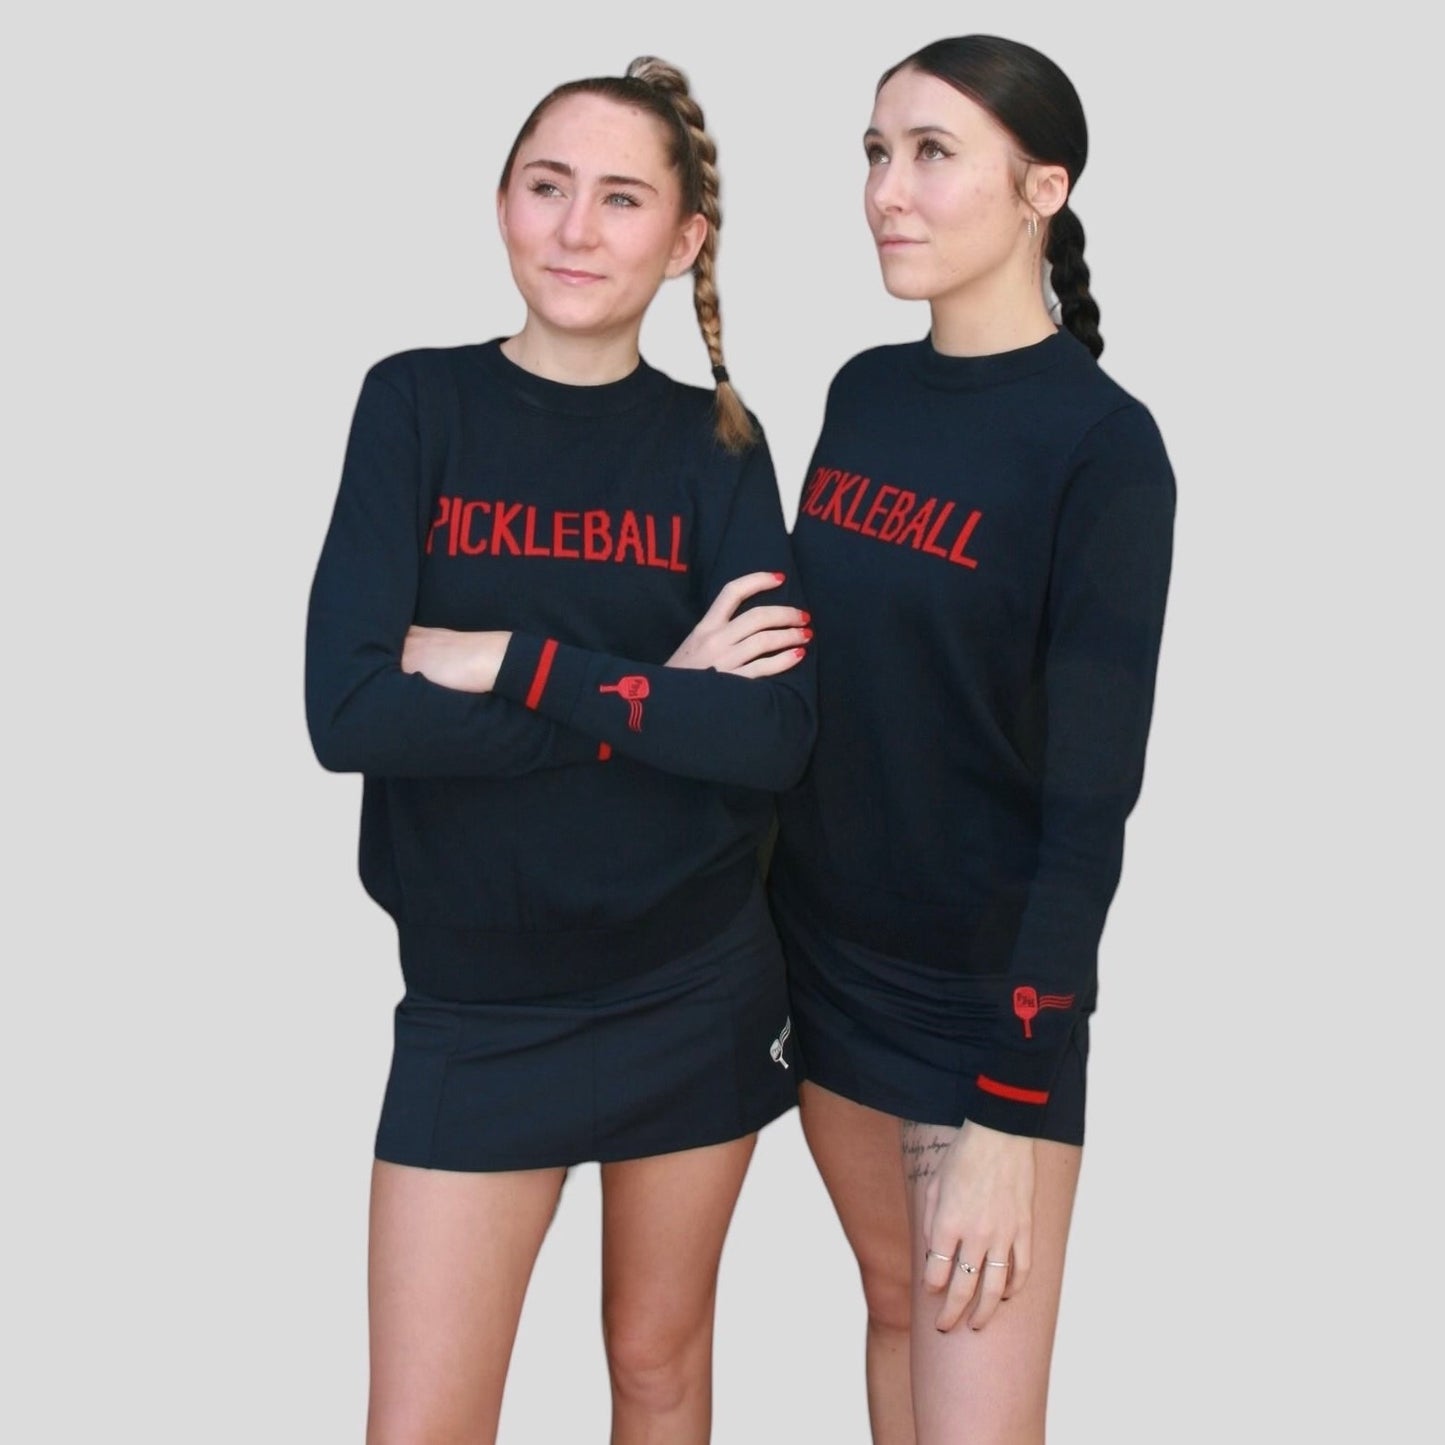 Pickleball Sweater - Navy and Red